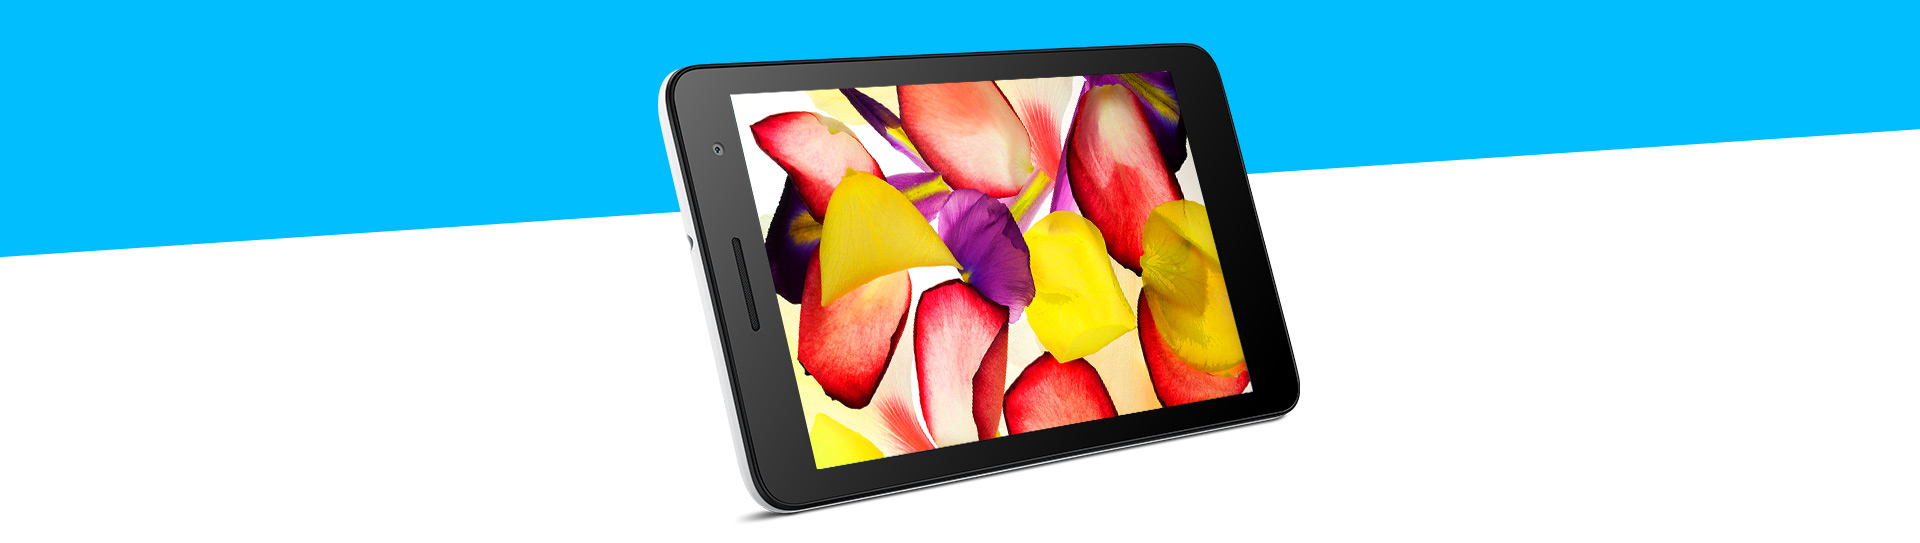 7-INCH DISPLAY, CAPABLE OF 16 MILLION COLORS